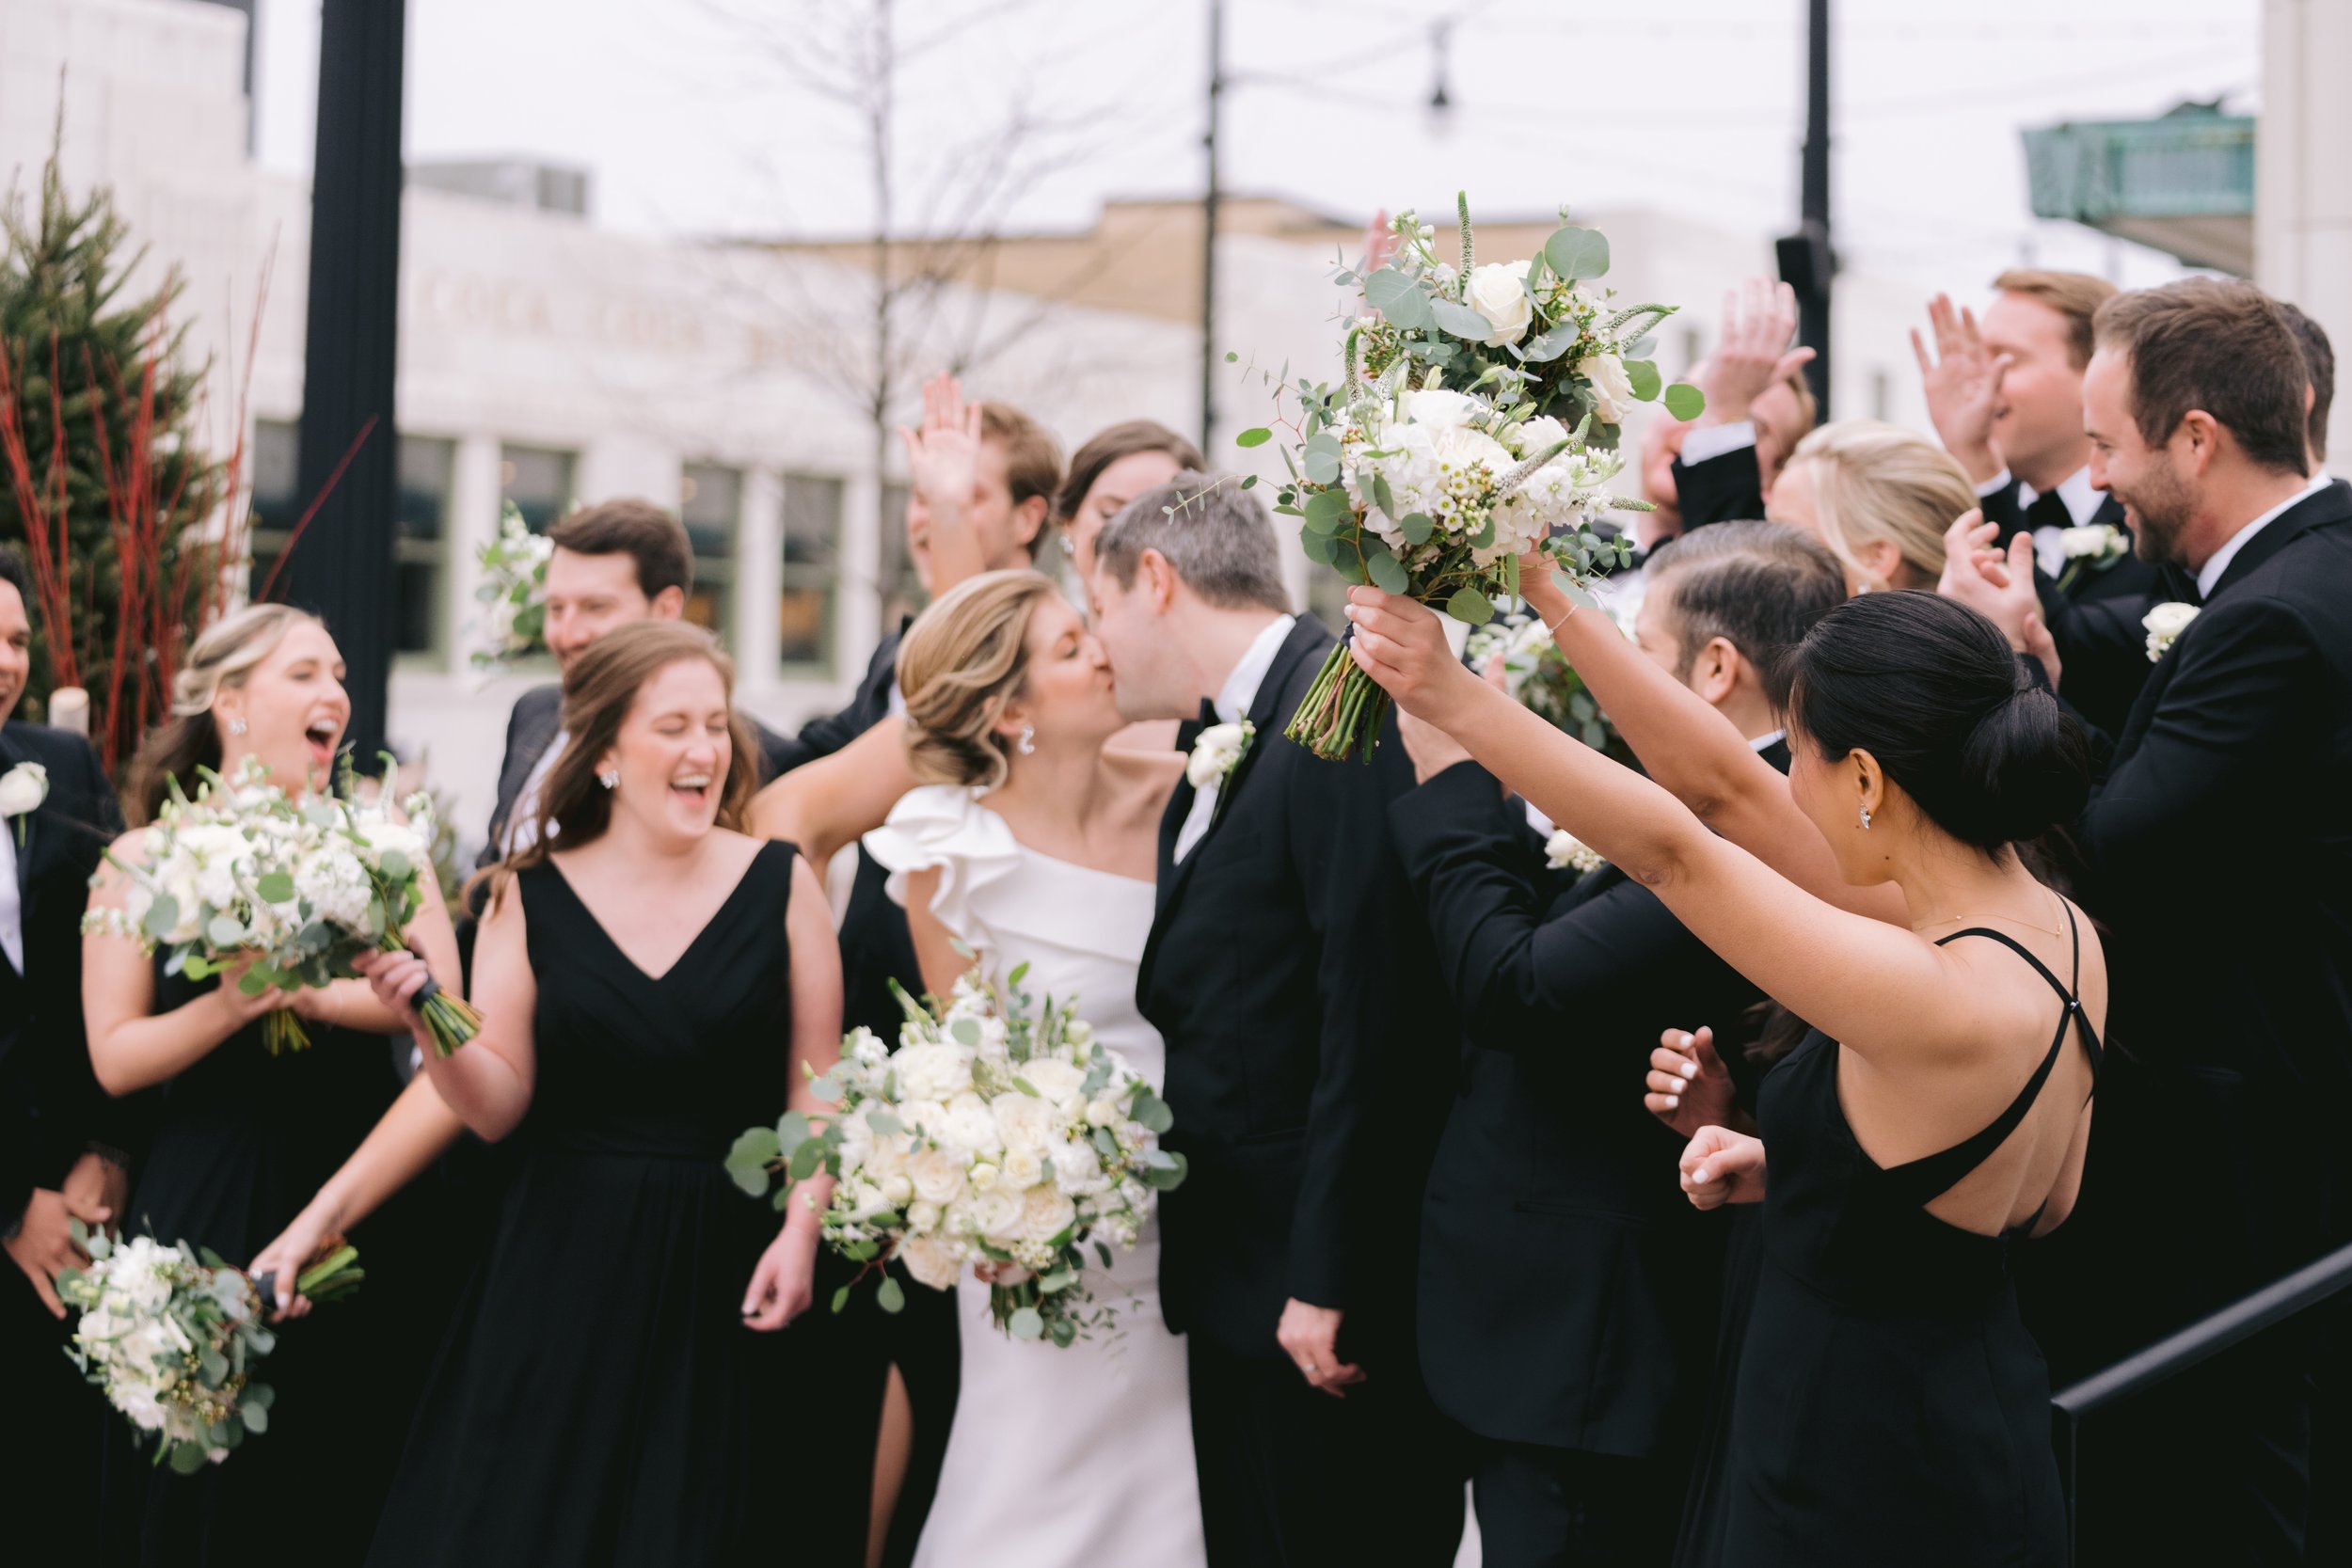 Anne and Evan Lenze indianapolis wedding elegant white wedding party bouquet picture.jpg